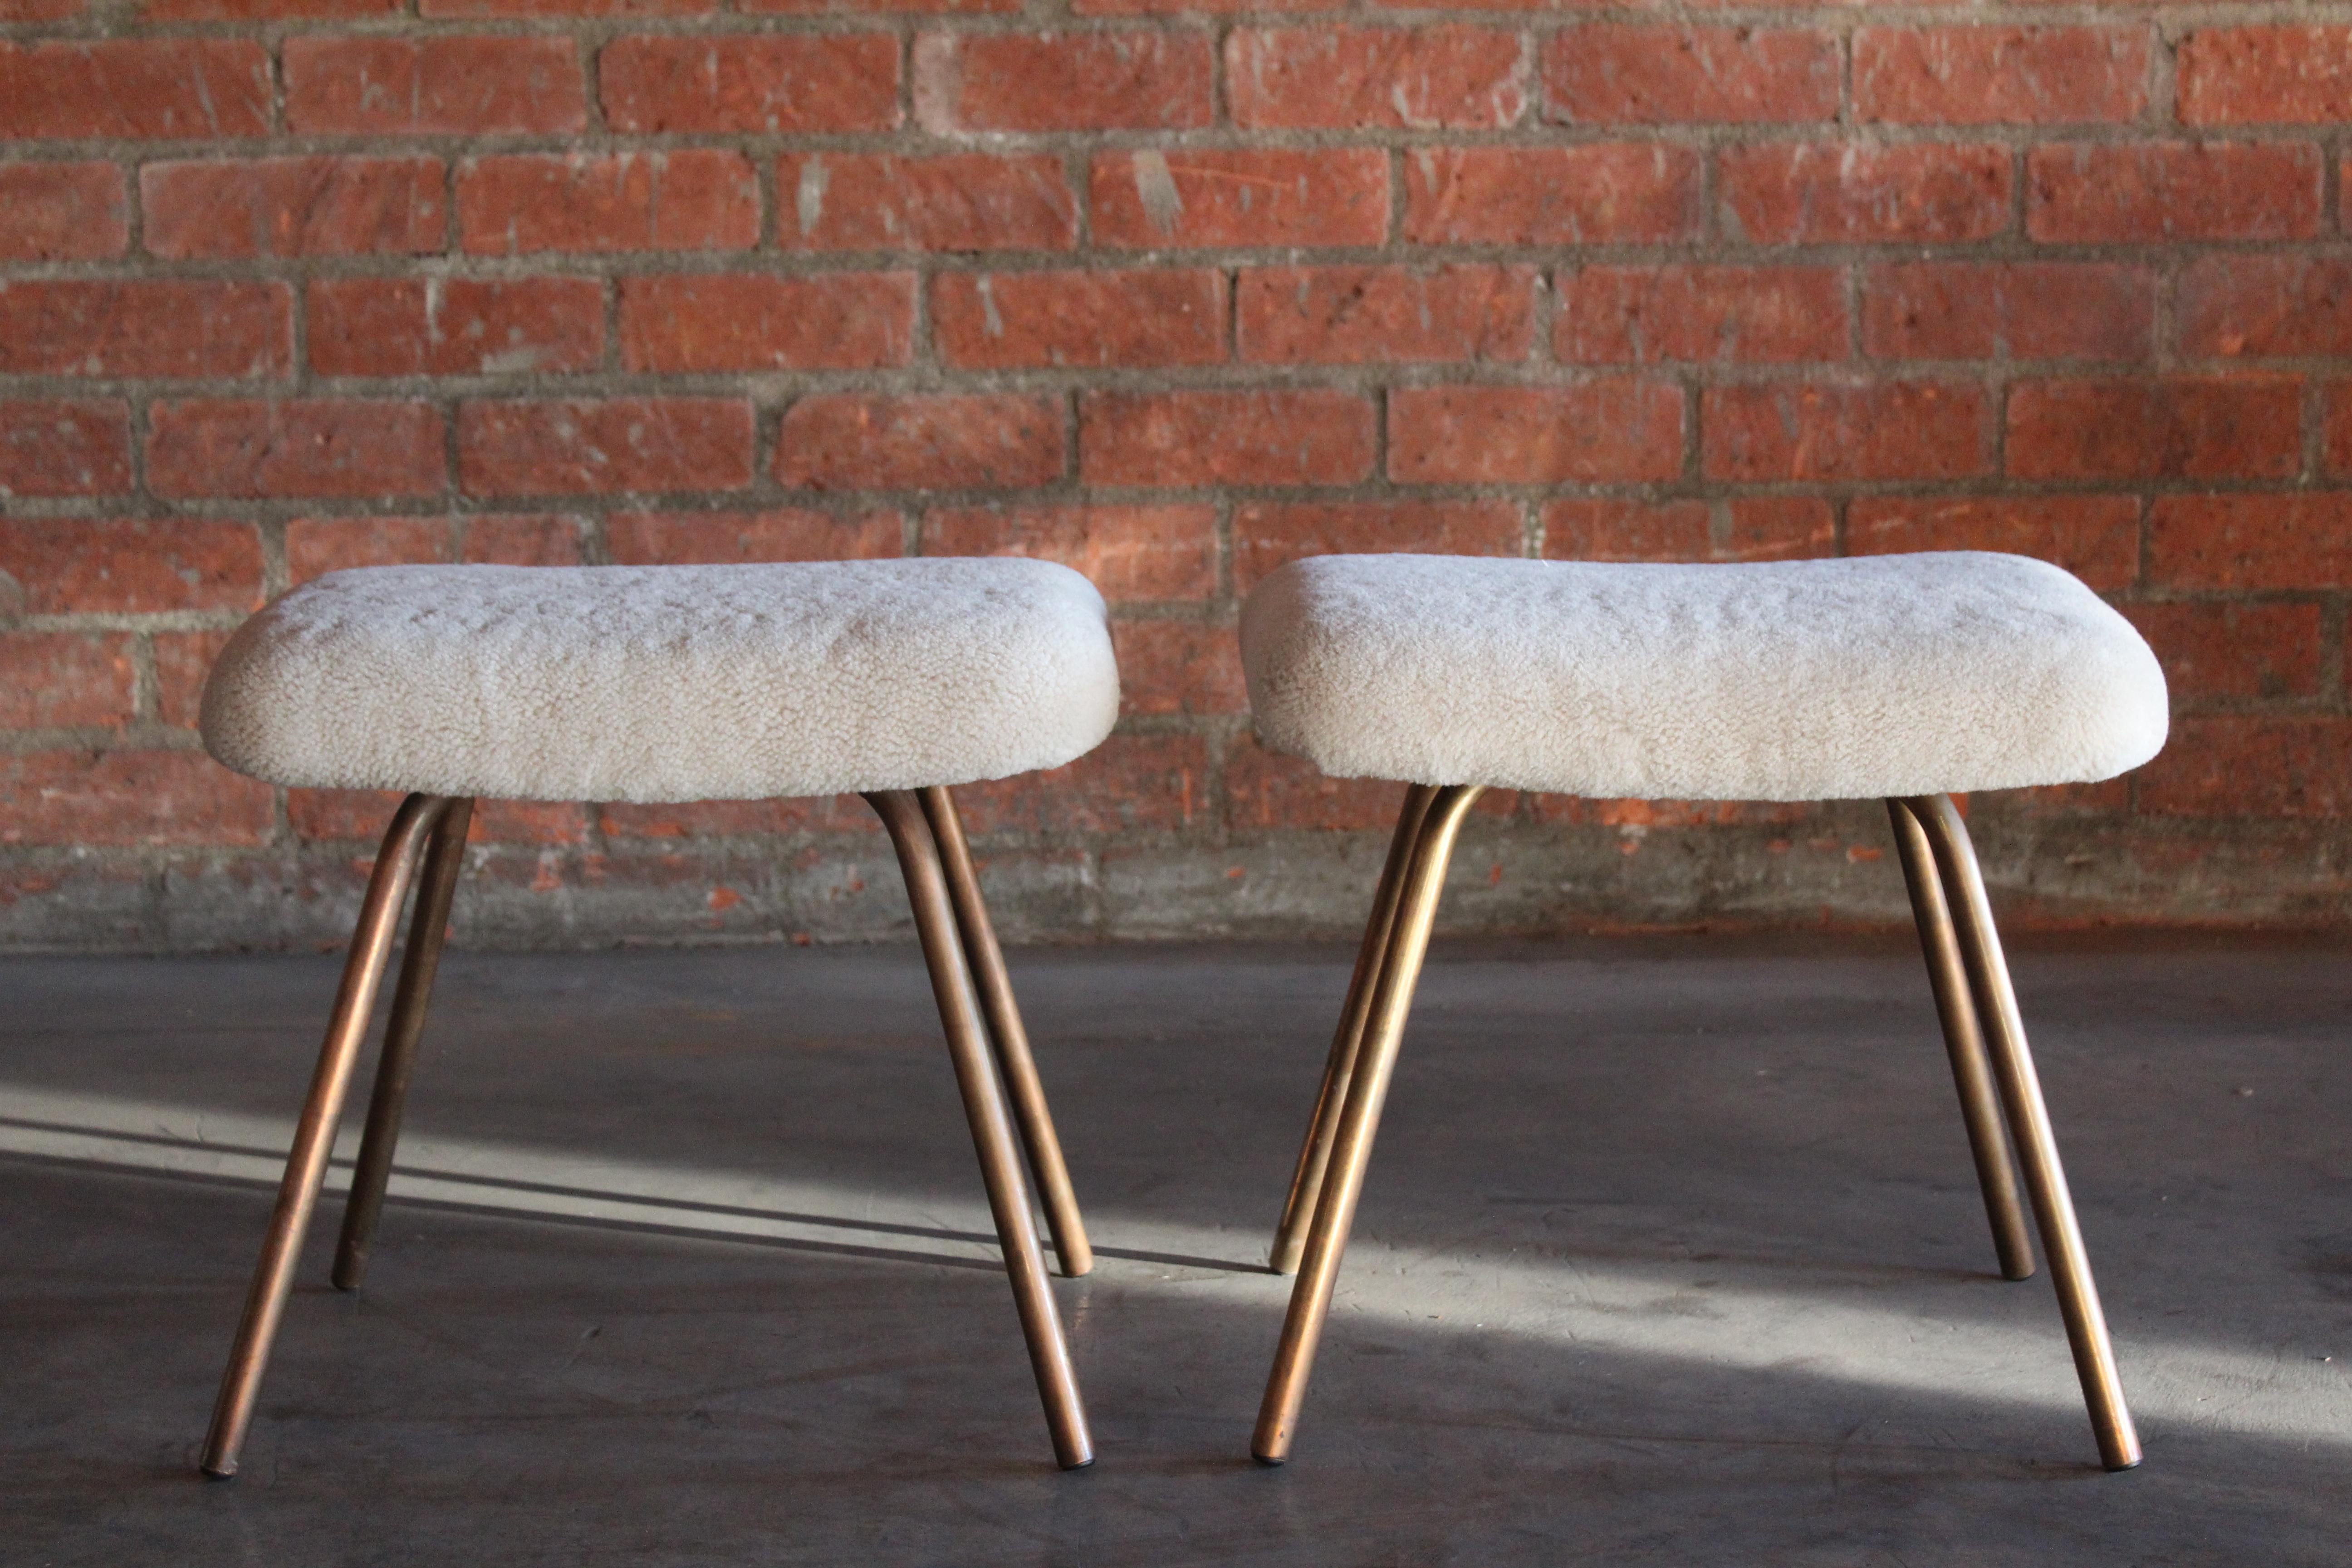 French Pair of Prototype Copper & Sheepskin Stools by Pierre Guariche, France, 1950s